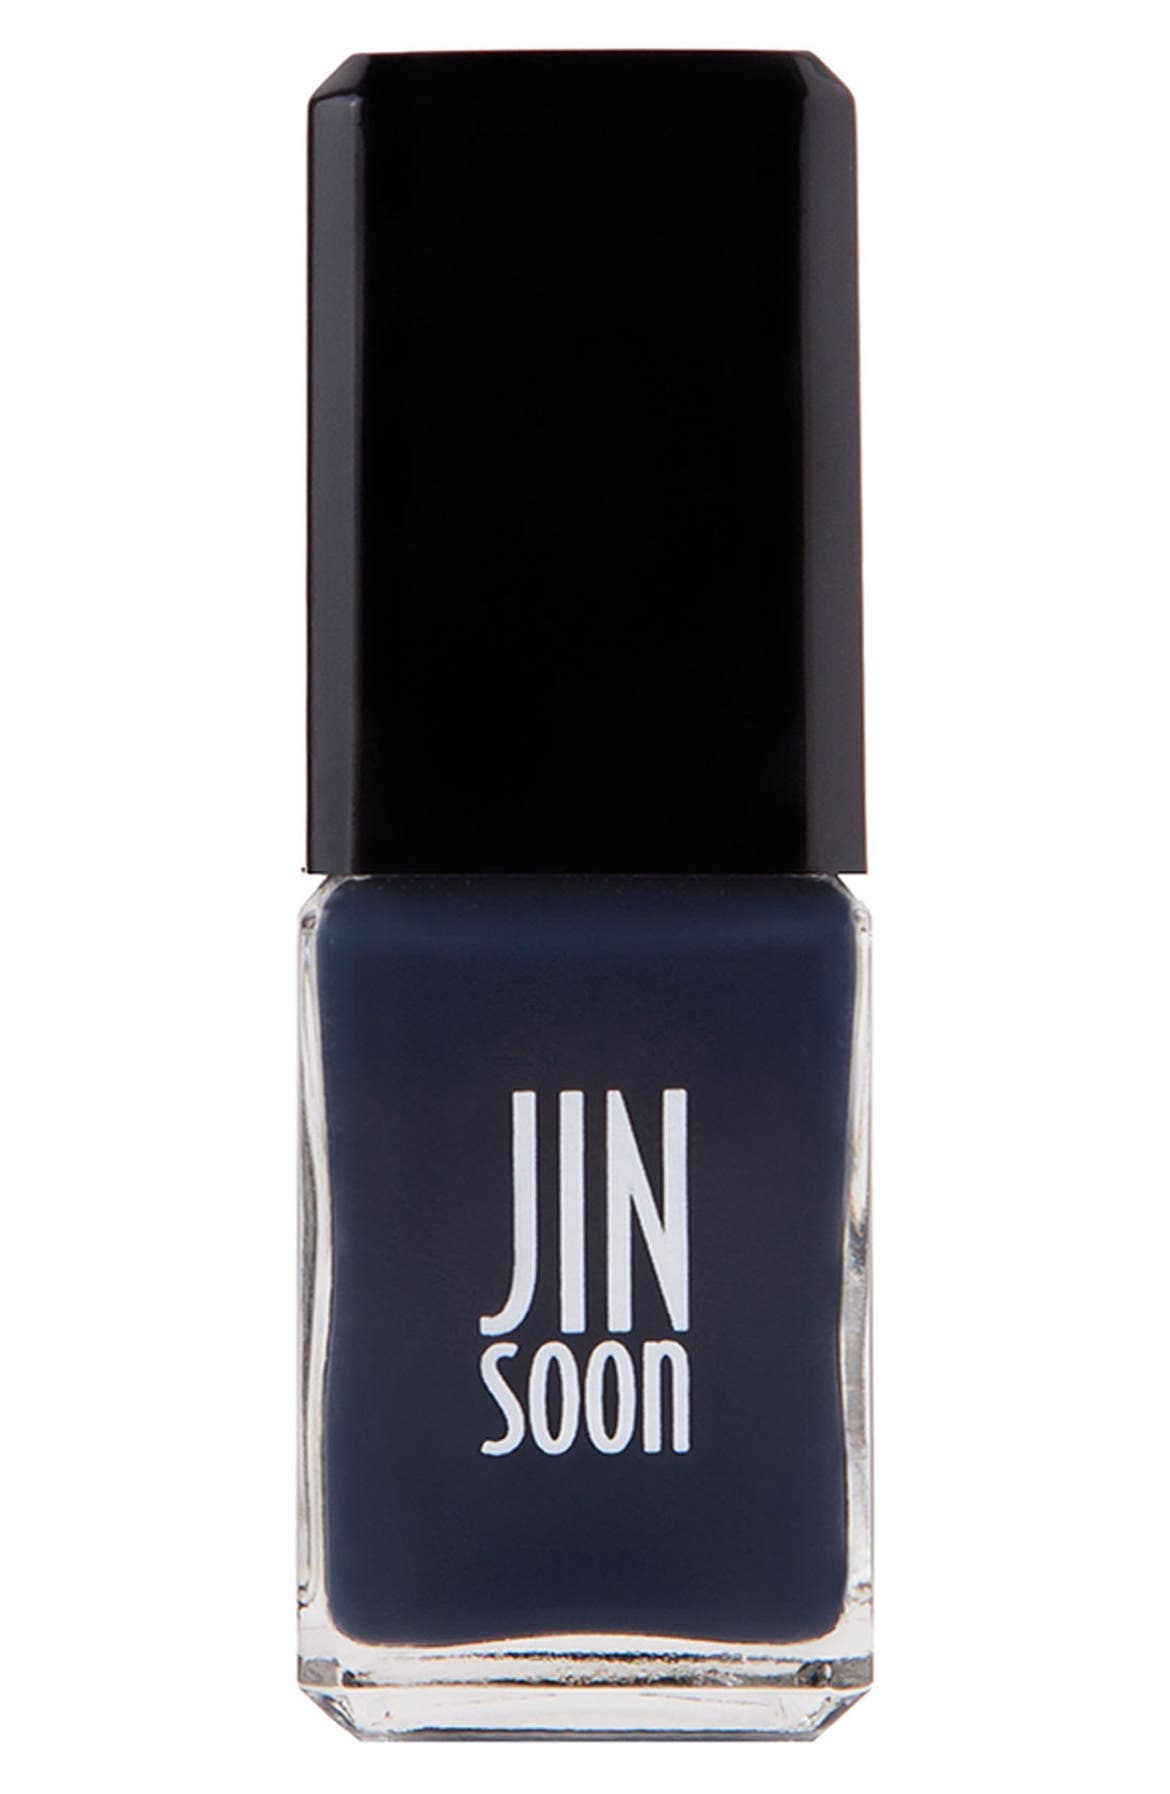 JINsoon 'Rhapsody' Nail Lacquer | Nordstrom